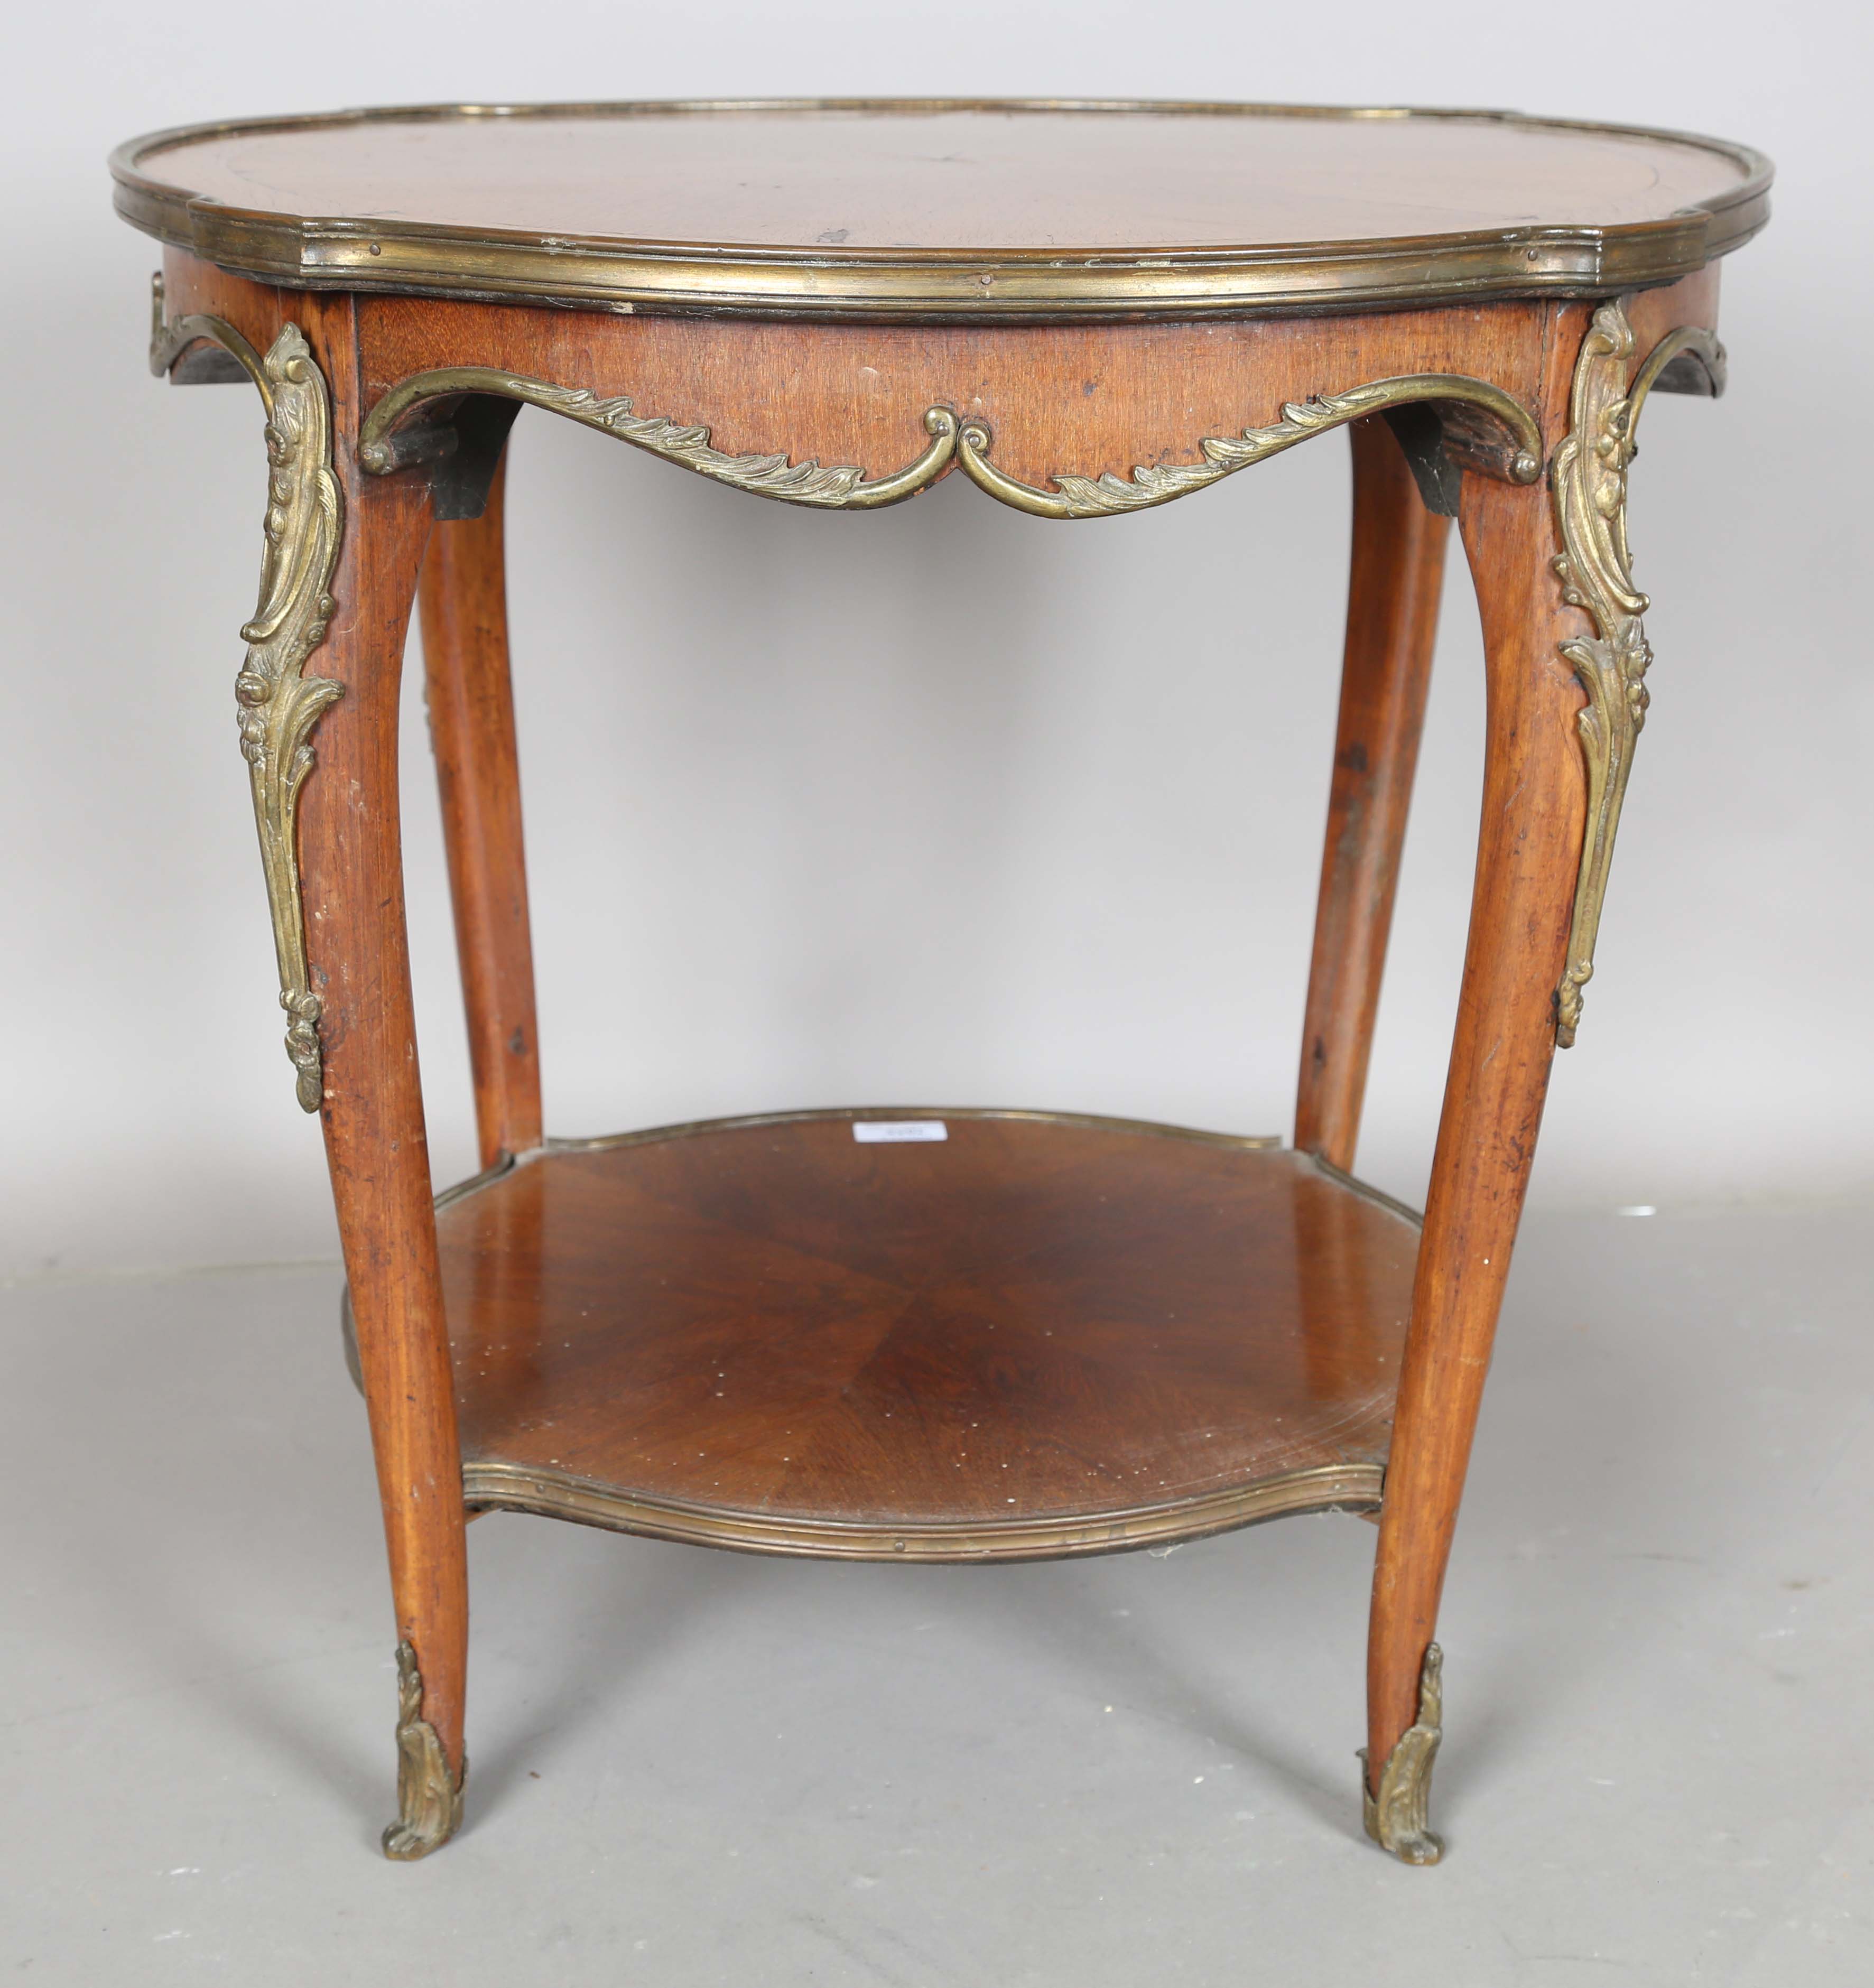 An early 20th century French walnut two-tier occasional table with radial veneers and gilt metal - Image 3 of 11